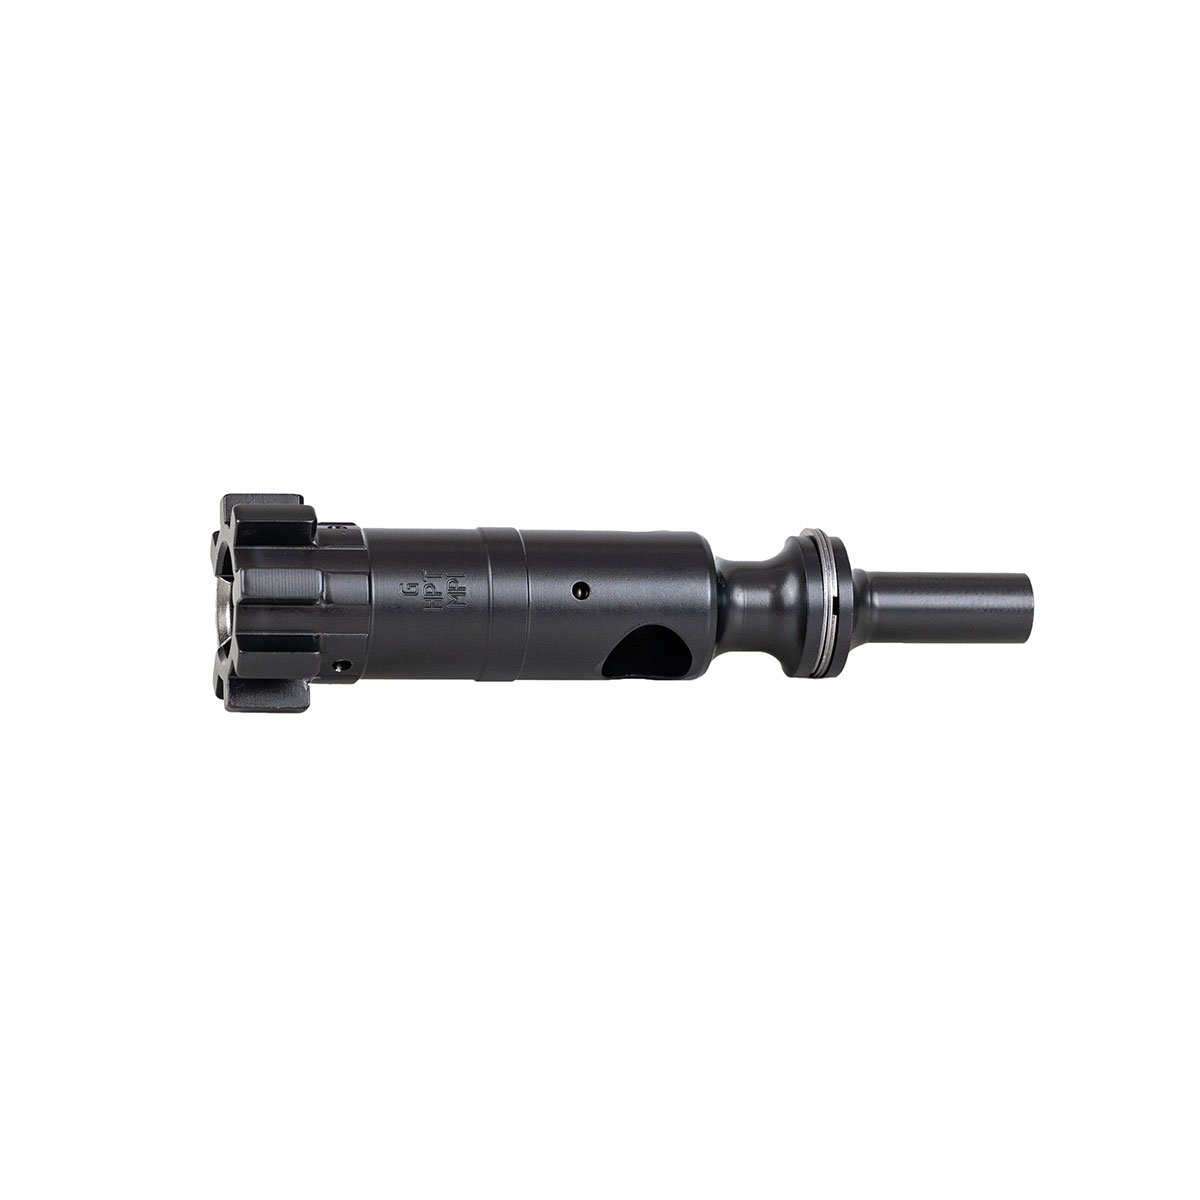 GEISSELE AUTOMATICS LLC - STRESSPROOF BOLT ASSEMBLY WITH EXTRACTOR